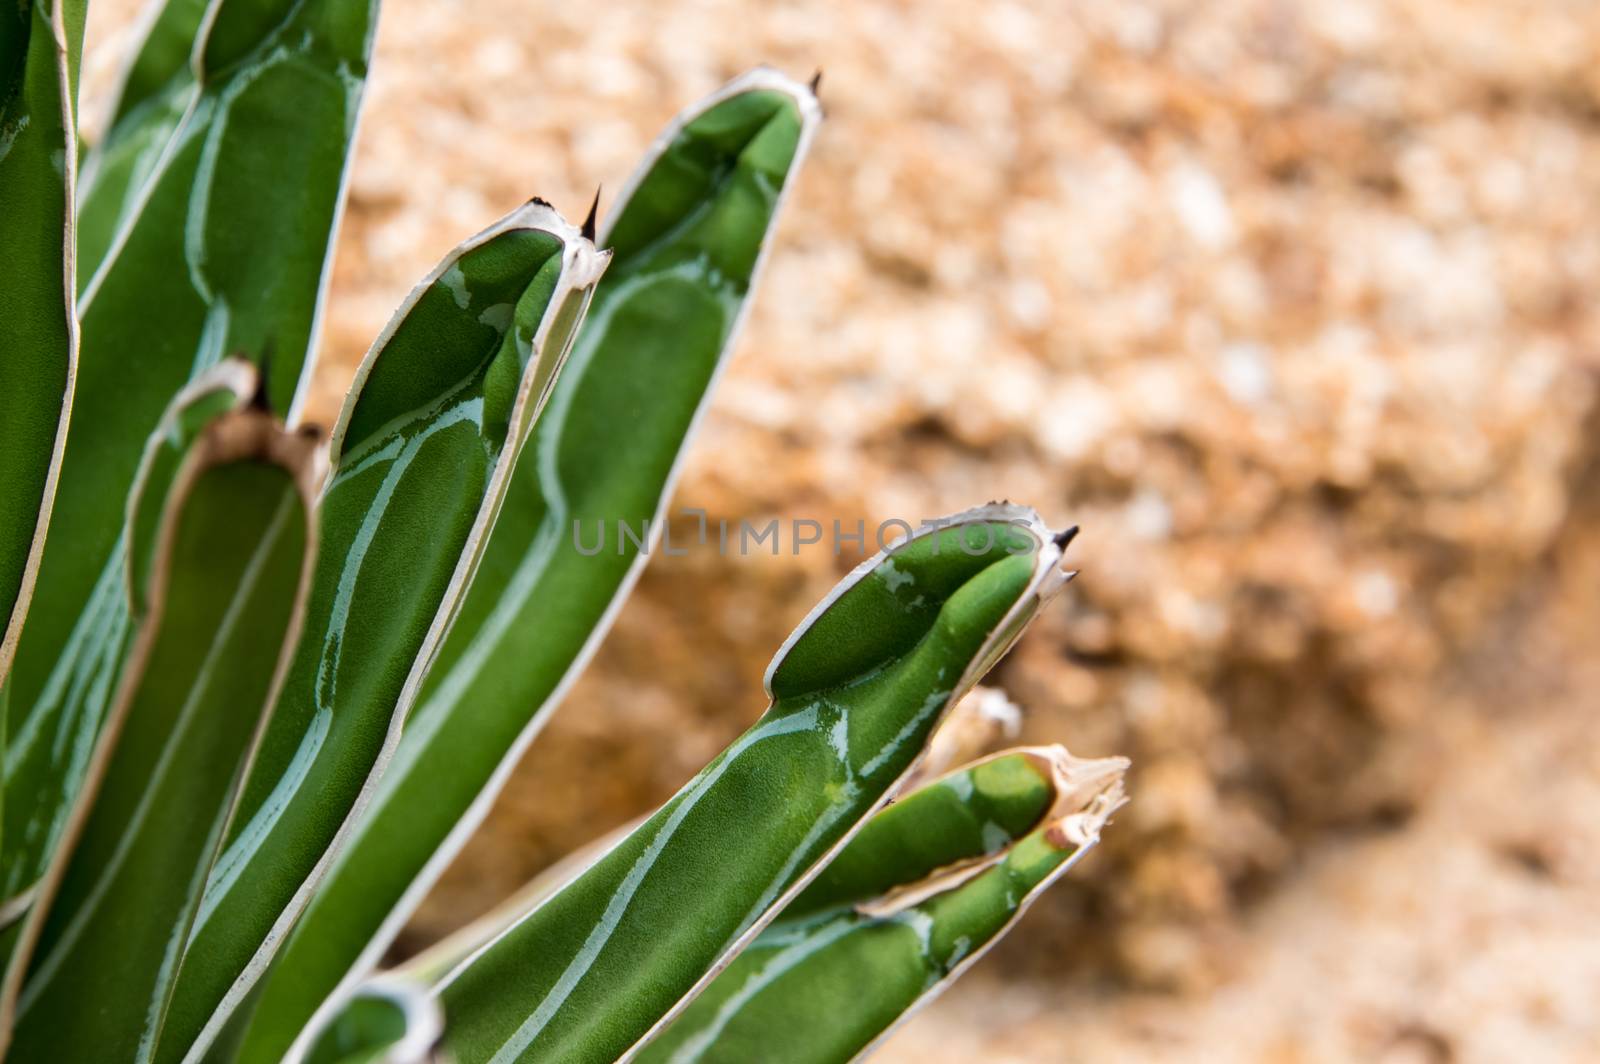 Agave succulent plant, freshness leaves with thorn of Queen victoria century agave